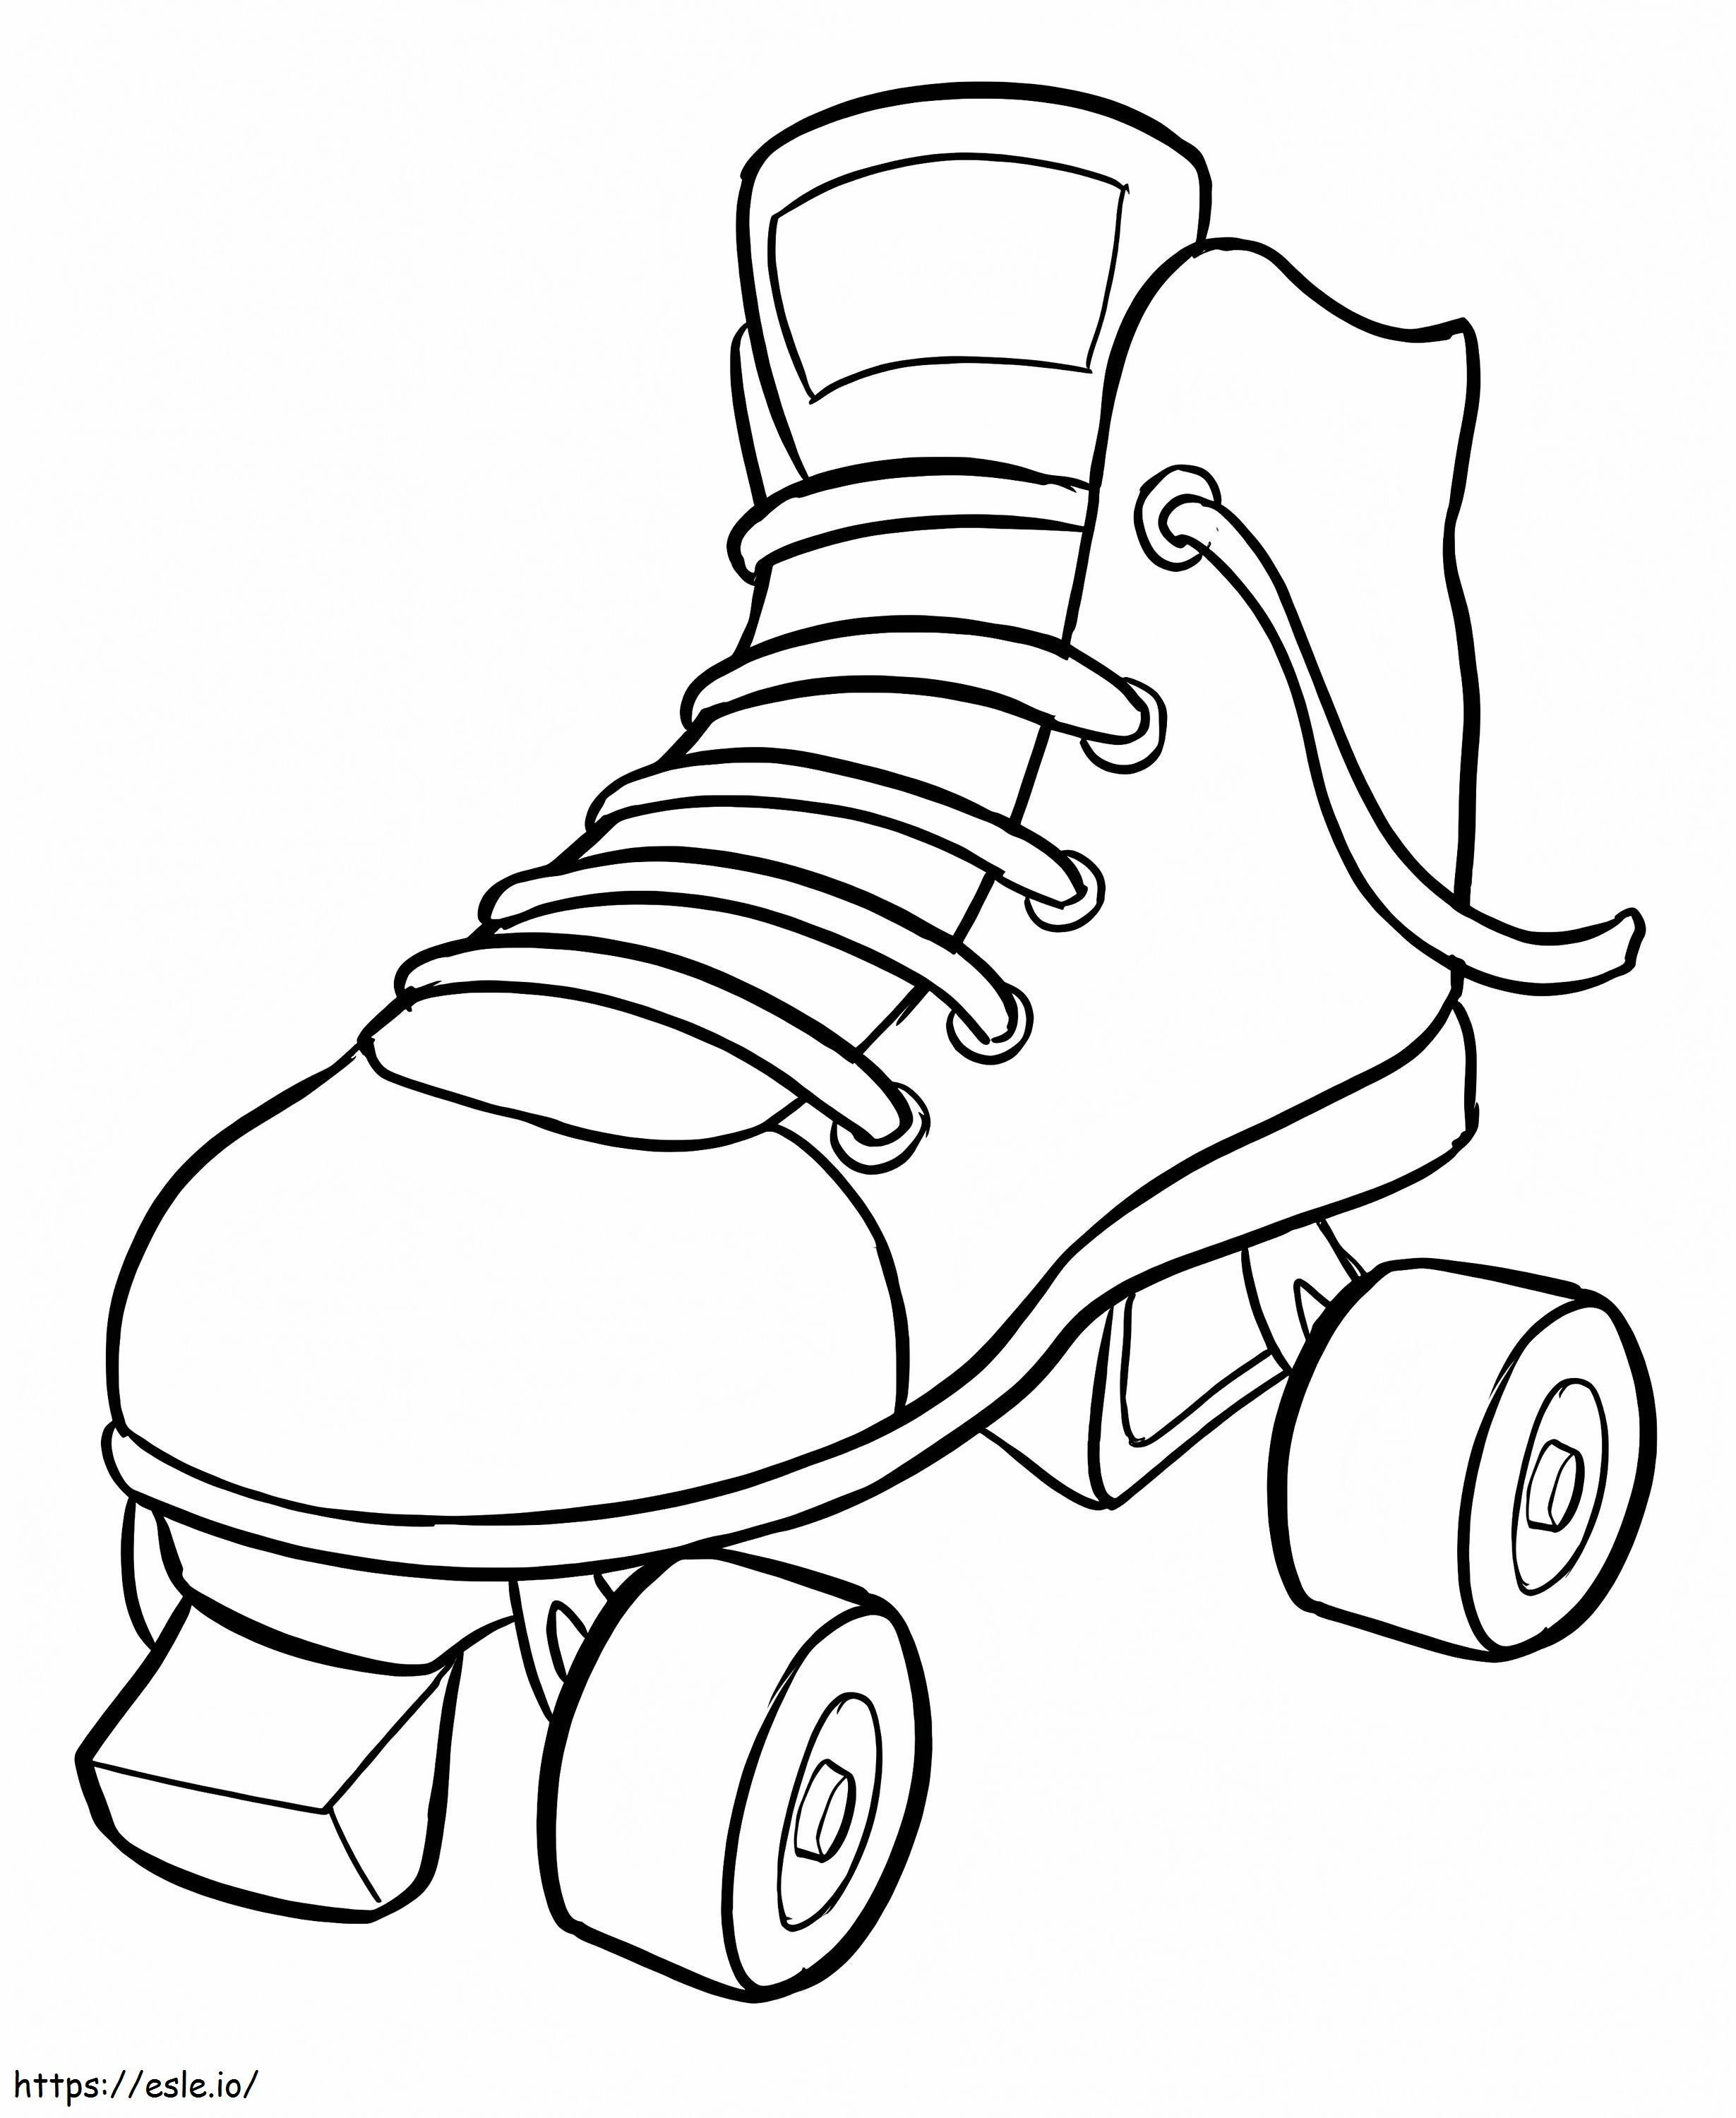 A Roller Skate coloring page